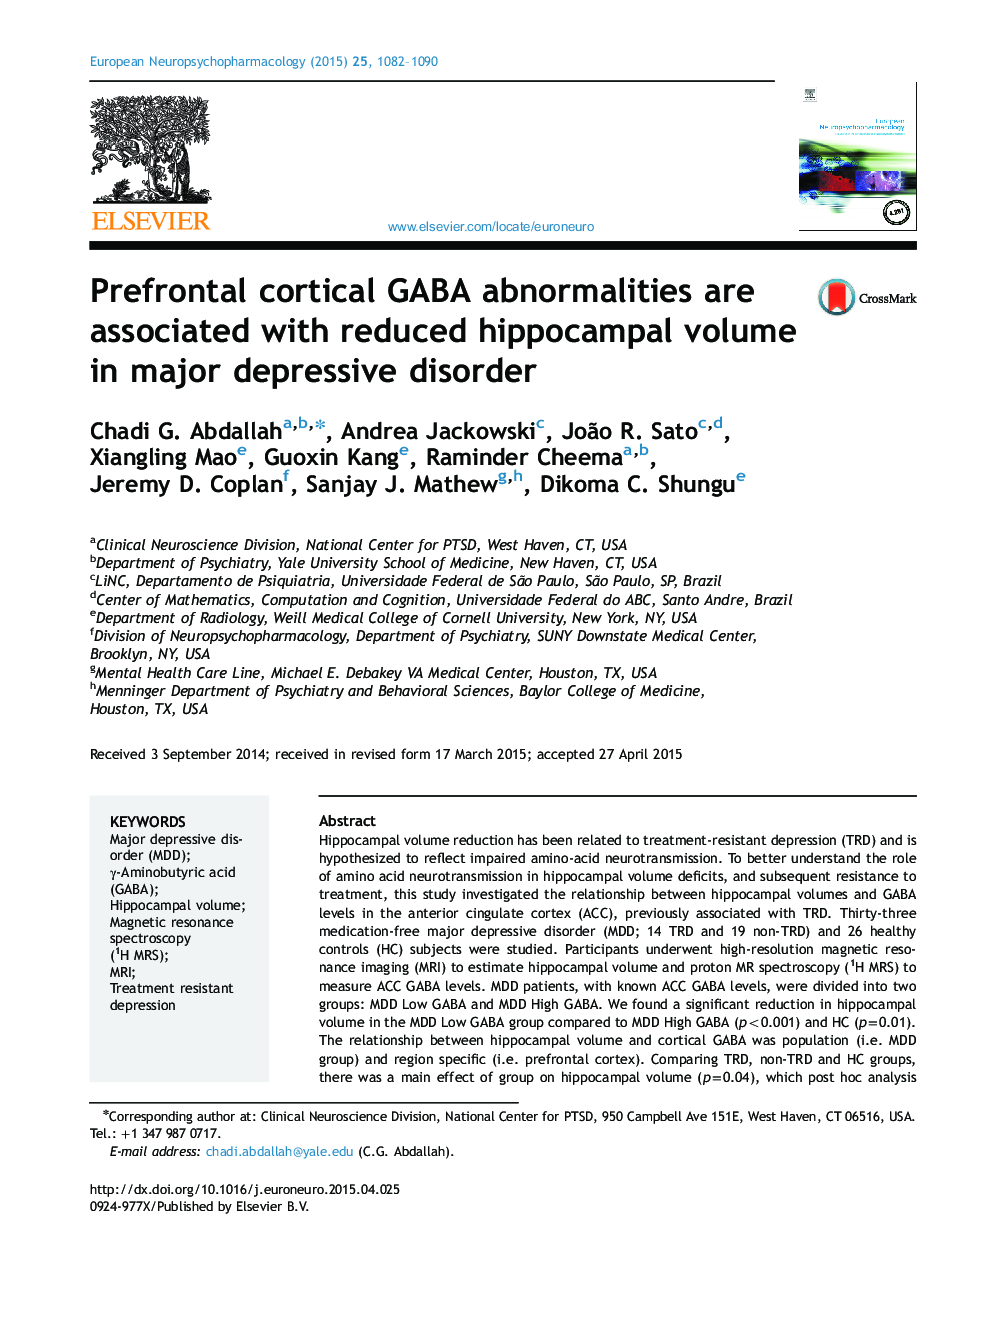 Prefrontal cortical GABA abnormalities are associated with reduced hippocampal volume in major depressive disorder